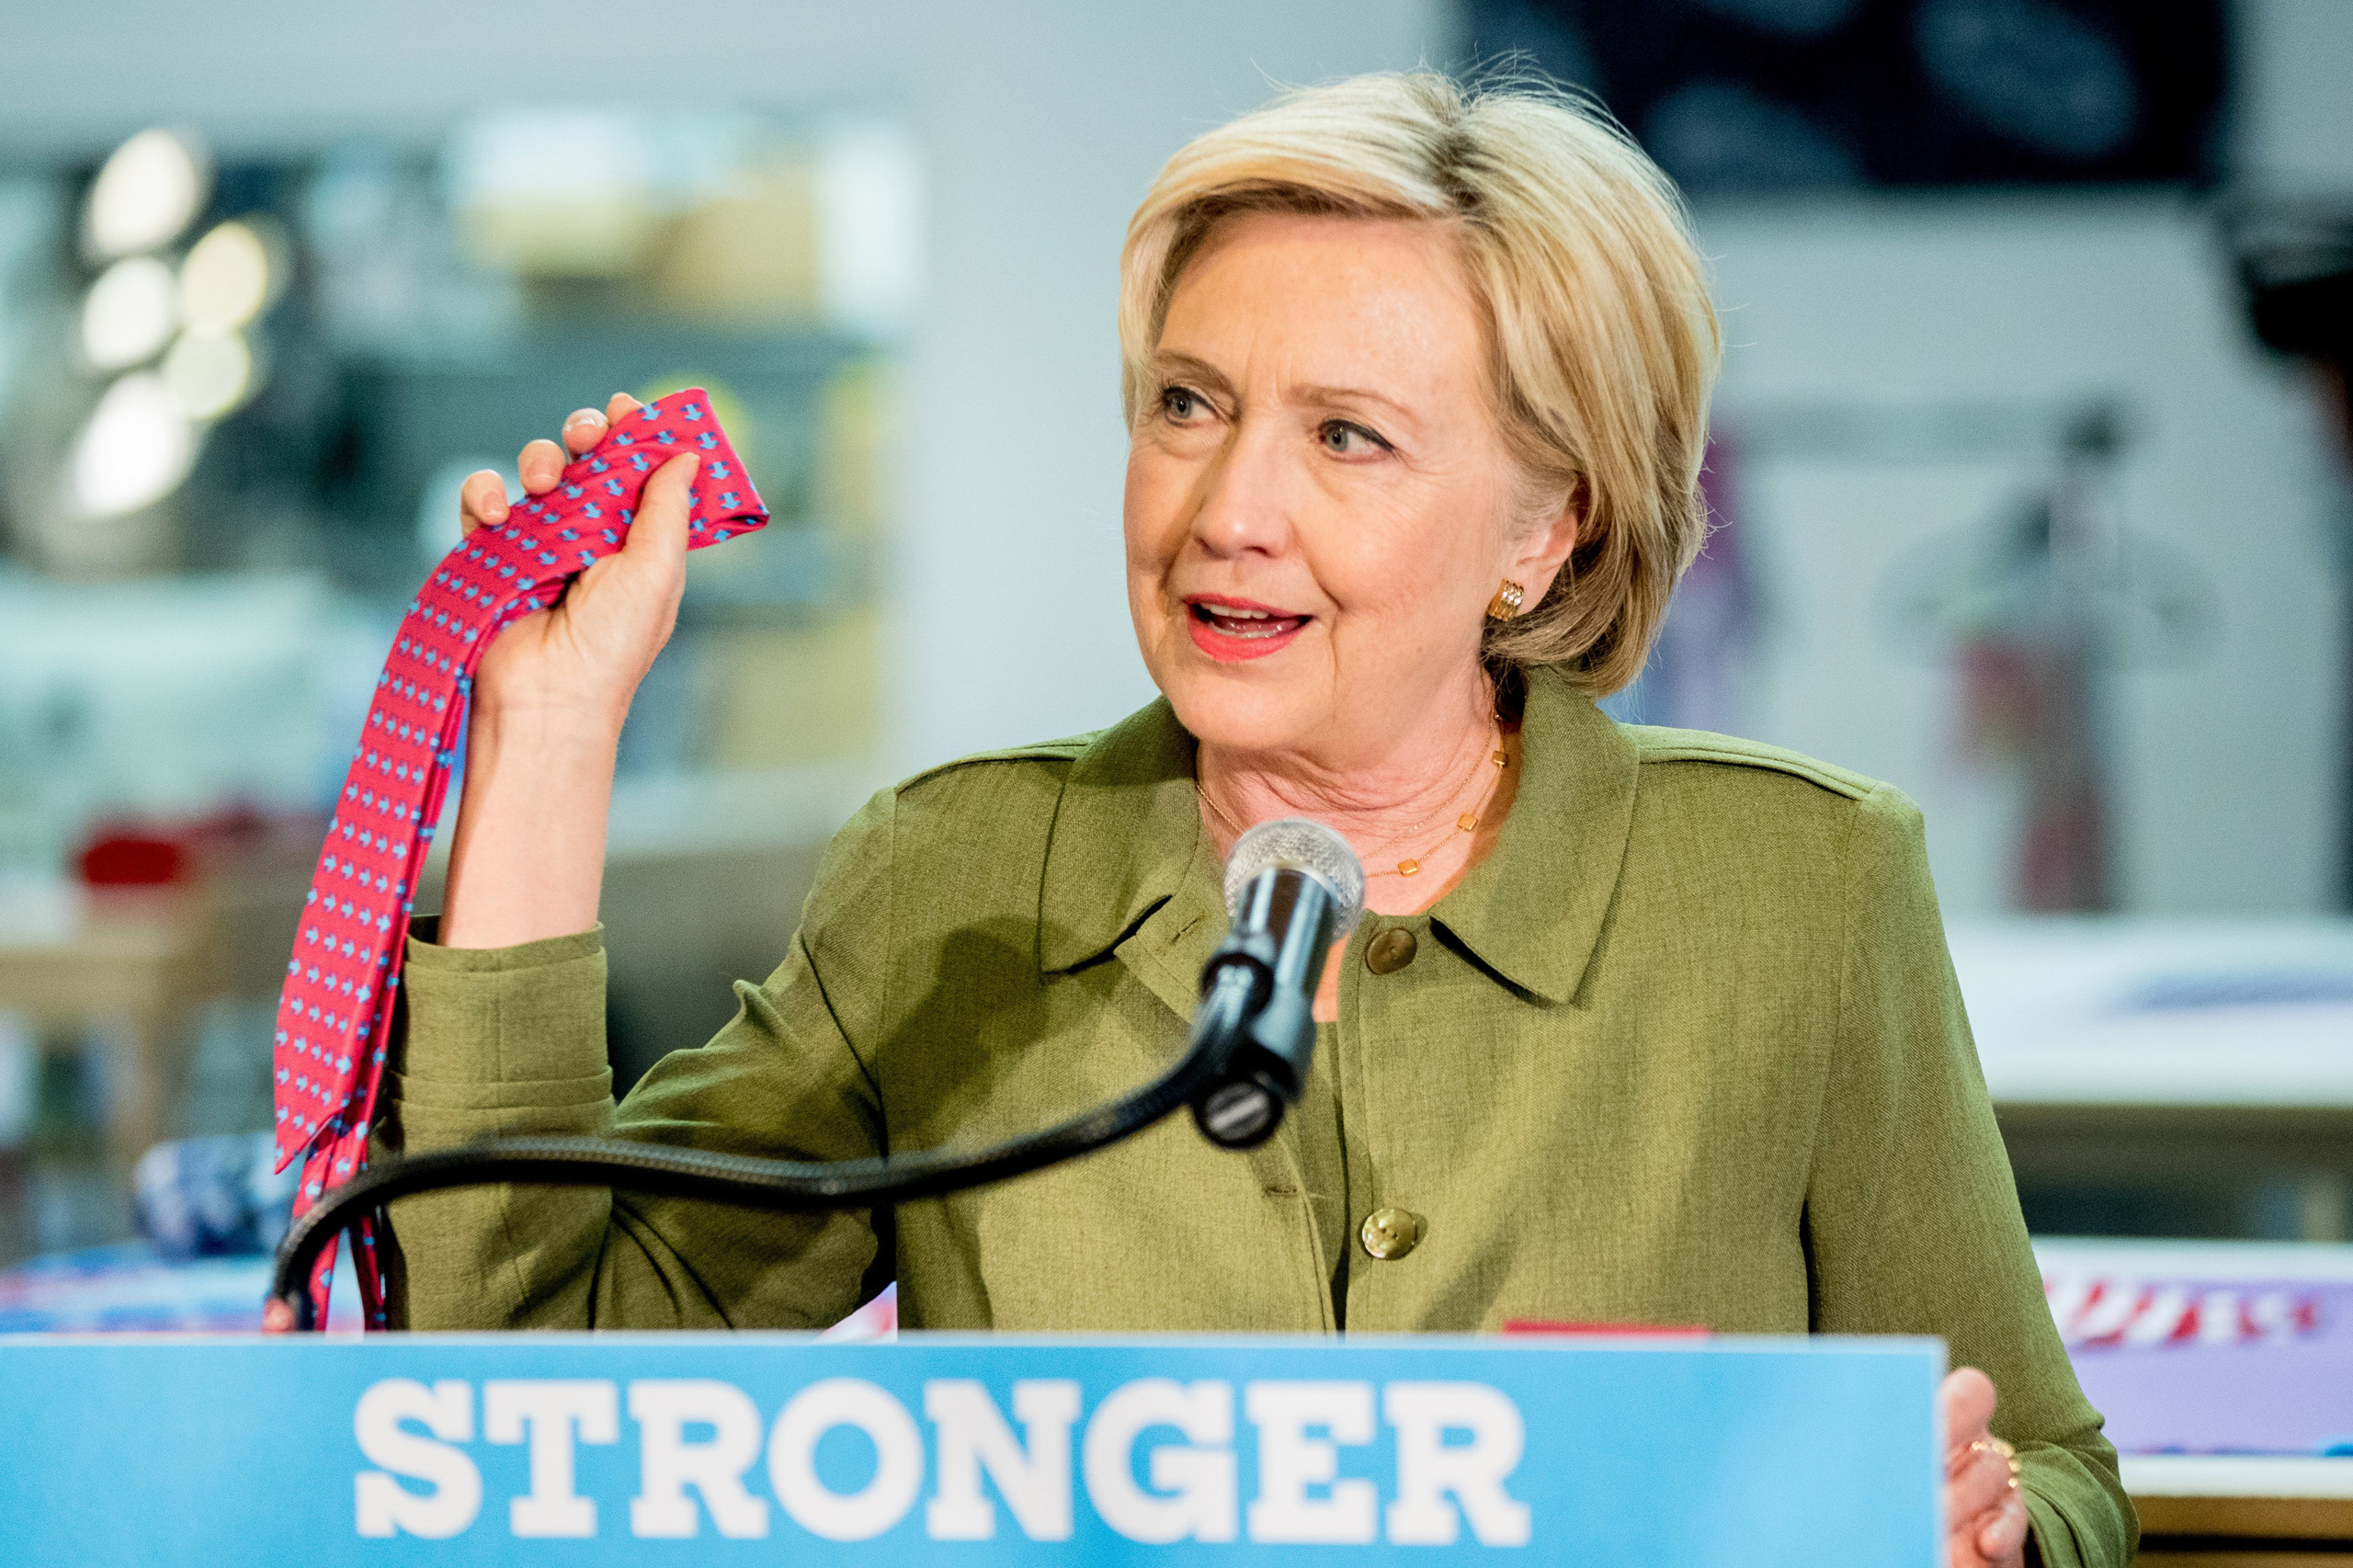 Democratic presidential candidate Hillary Clinton holds up an American made Knotty Tie as she speaks after taking a tour of Knotty Tie Company in Denver on Aug. 3, 2016.